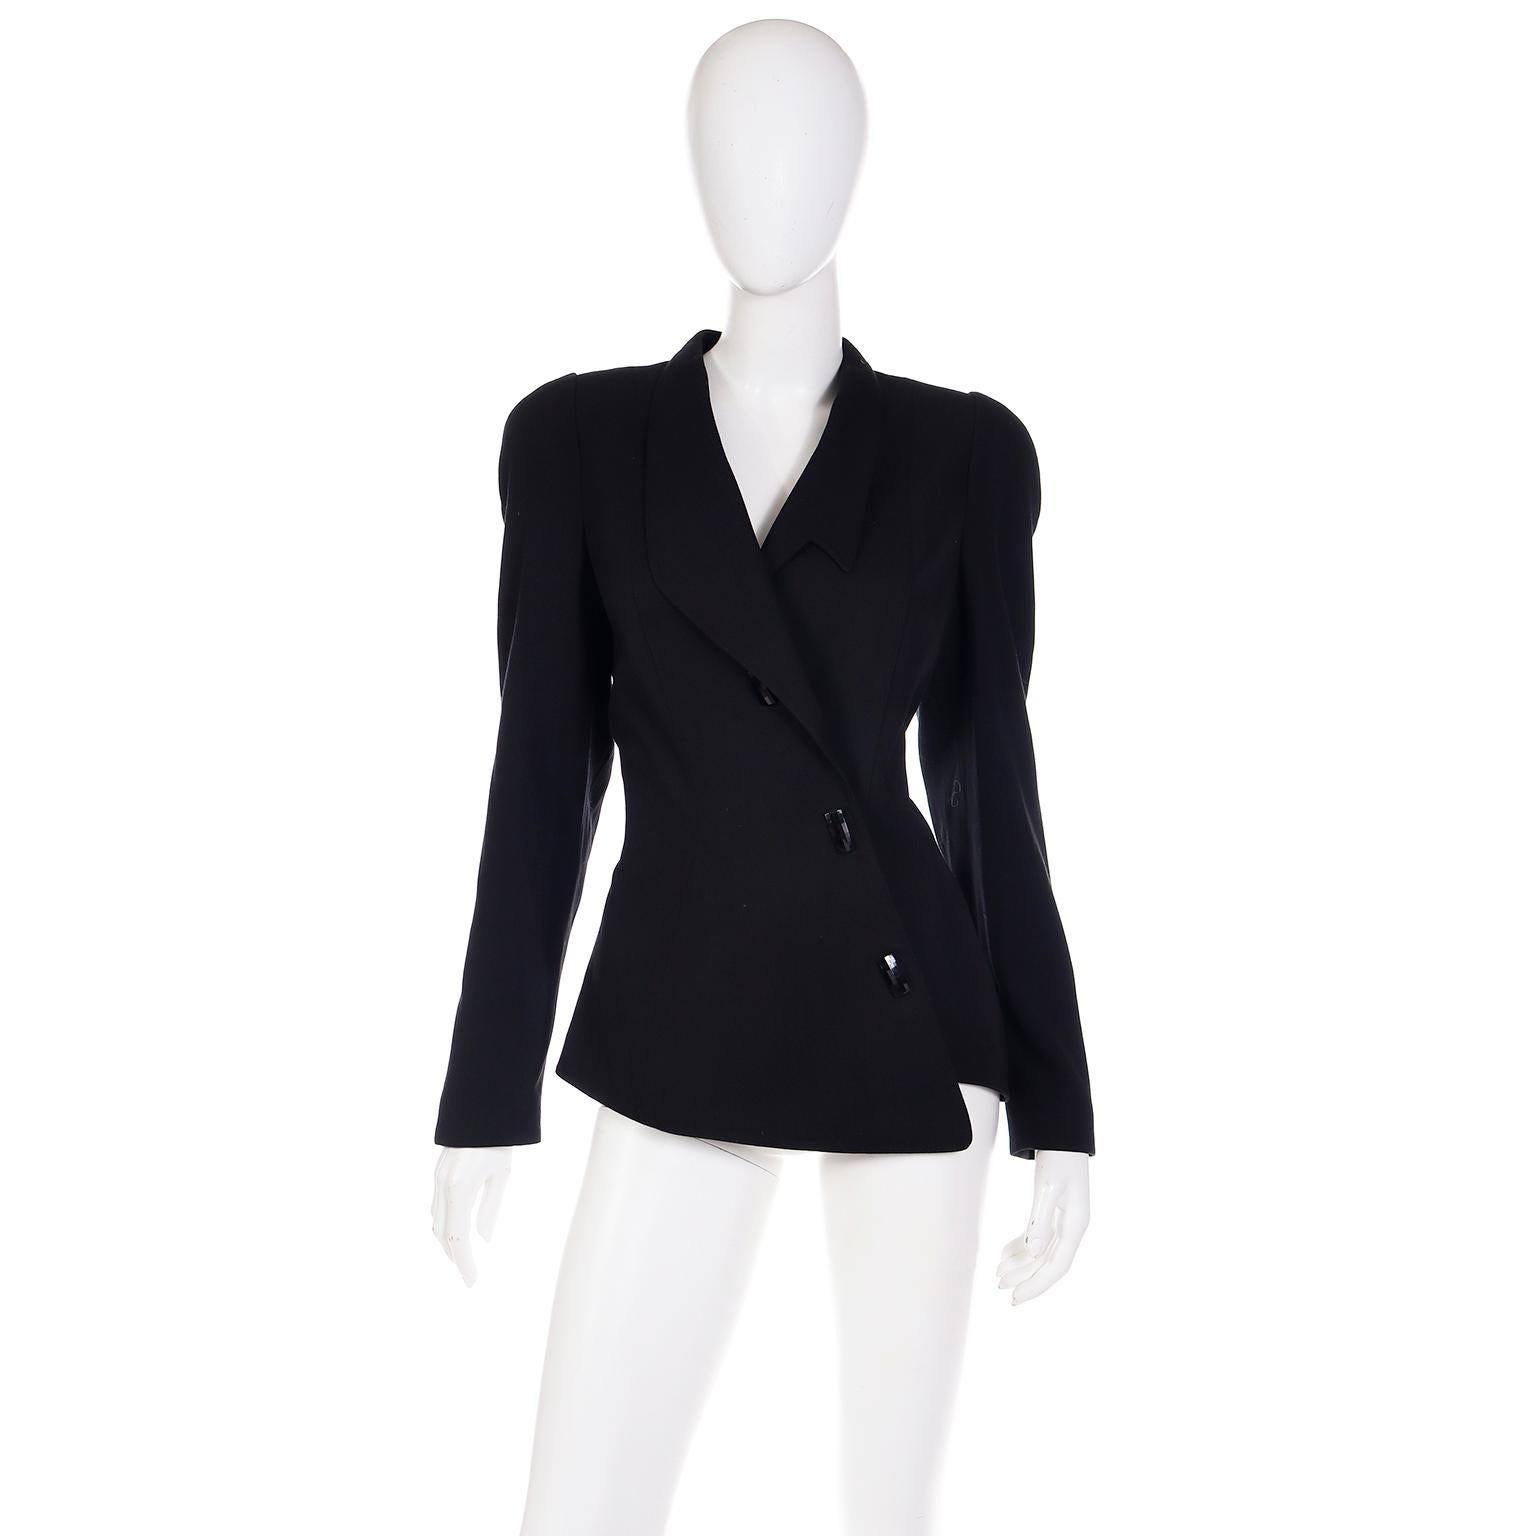 This vintage Thierry Mugler Act IV jacket was never worn and still has its original tags attached.  This gorgeous fitted blazer has an asymmetrical design and is made of 65% wool and 35% viscose.There are two snap closures along center front with